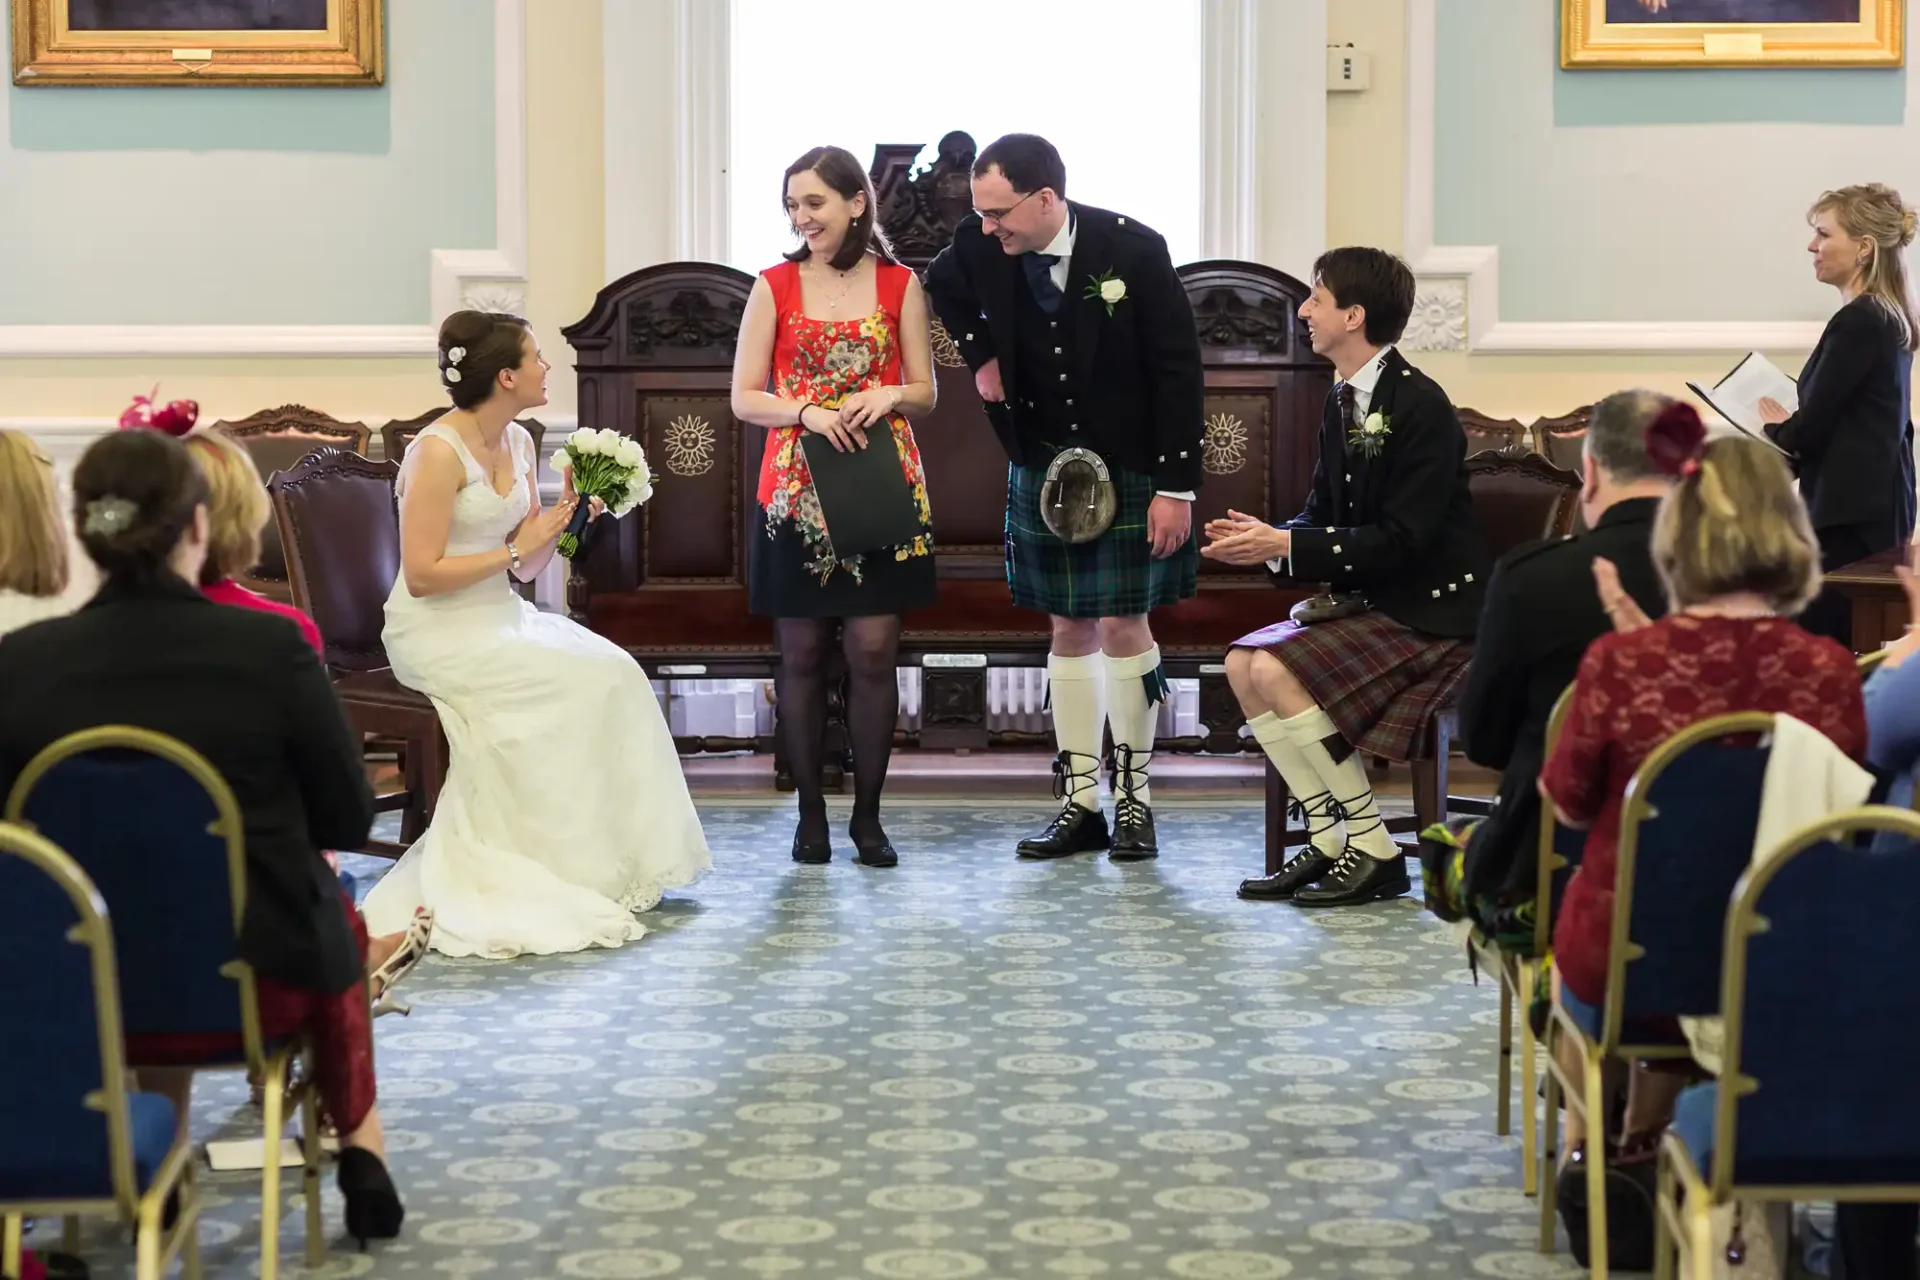 A bride in a white dress and a groom in a kilt smile at each other, holding hands in a hall with seated guests.